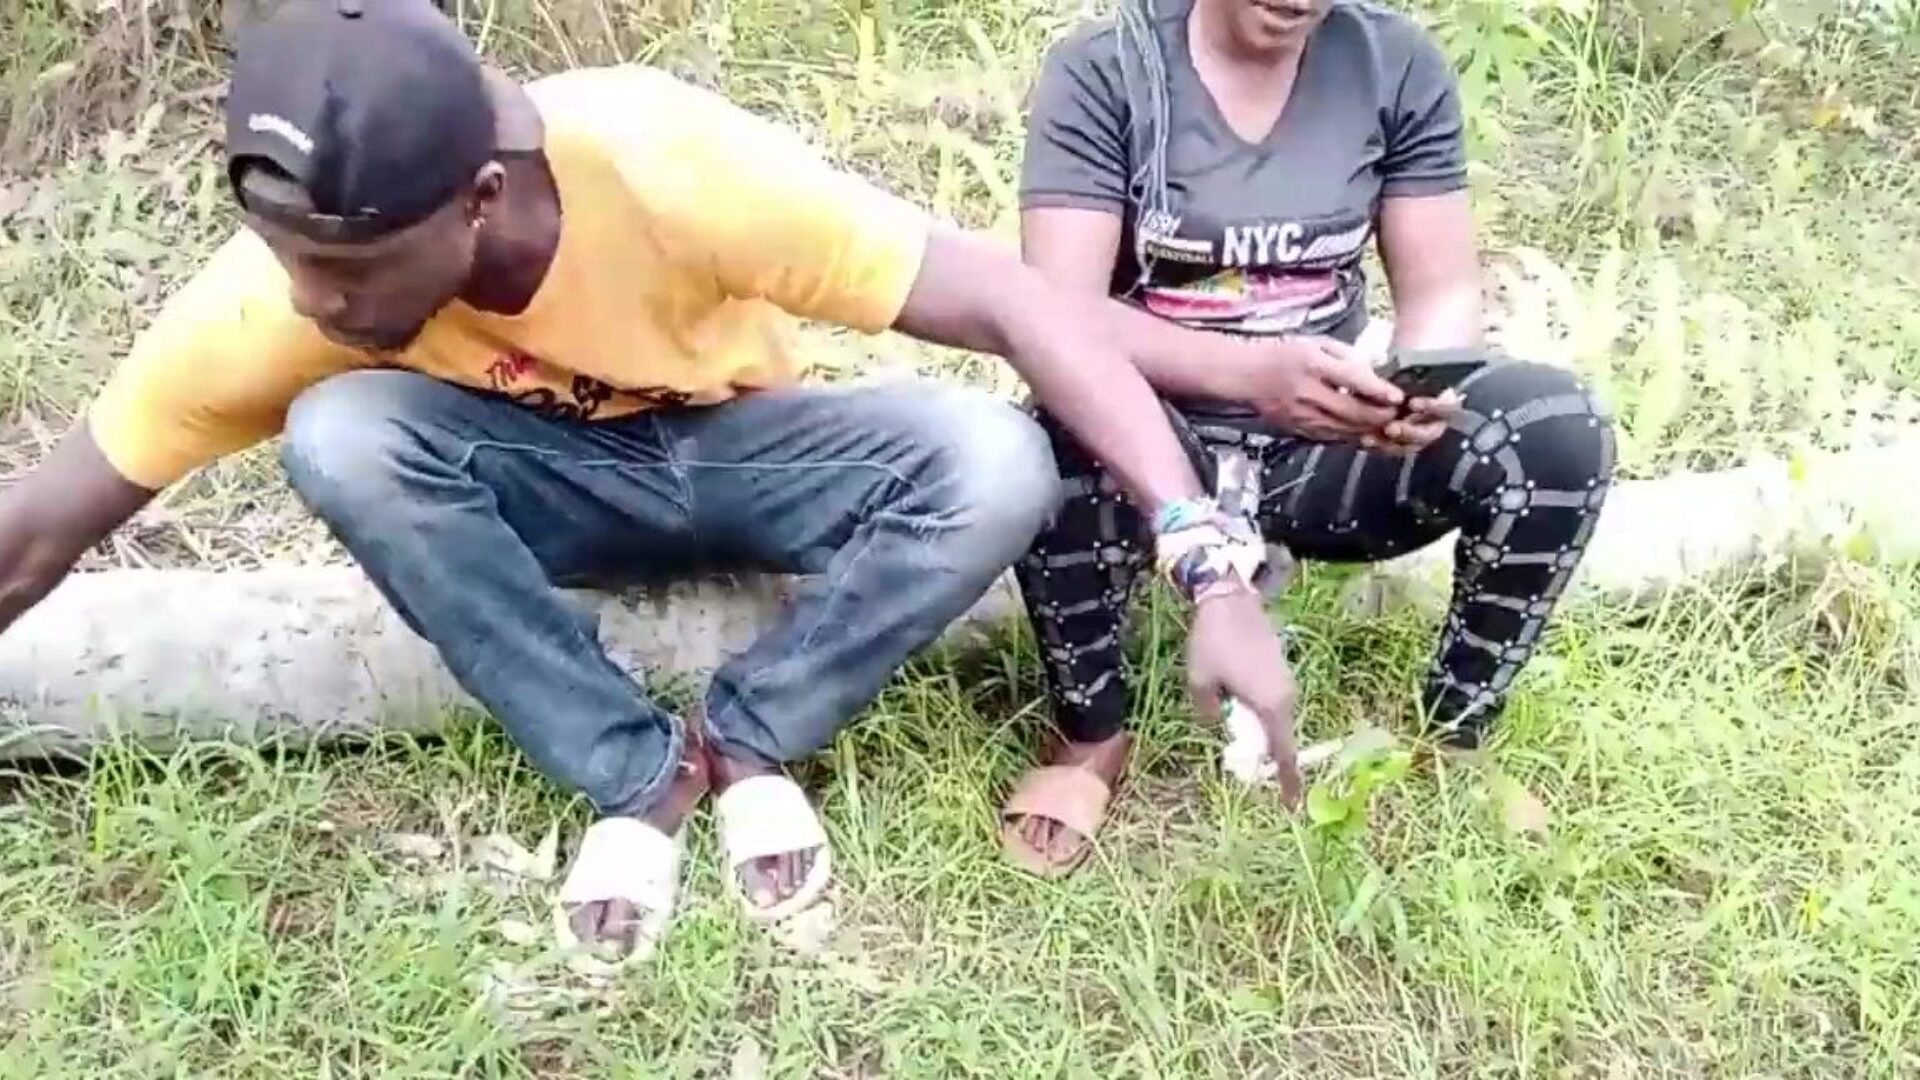 Two Campus boyz went down the forest to have an outdoor joy they screwed during the time that villagers were passing